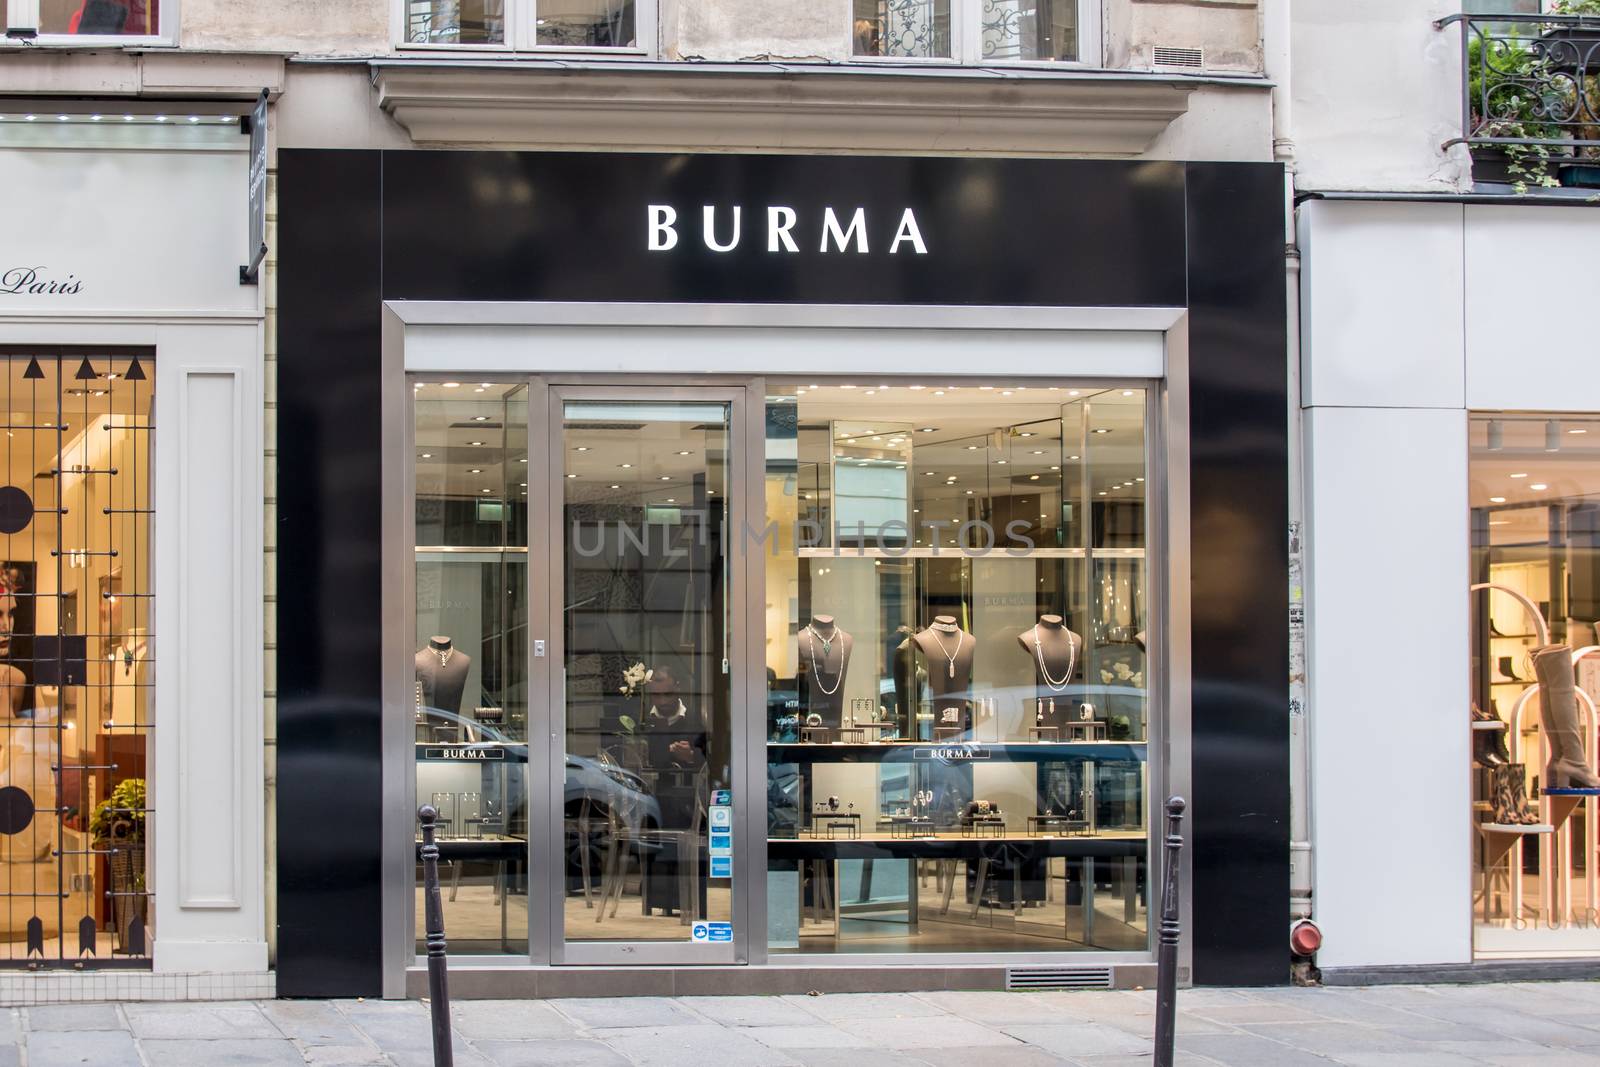 Shop facade on " Rue saint Honoré " of Burma Store in Paris, France, this brand is well known for Luxury jewels. by ontheroadagain